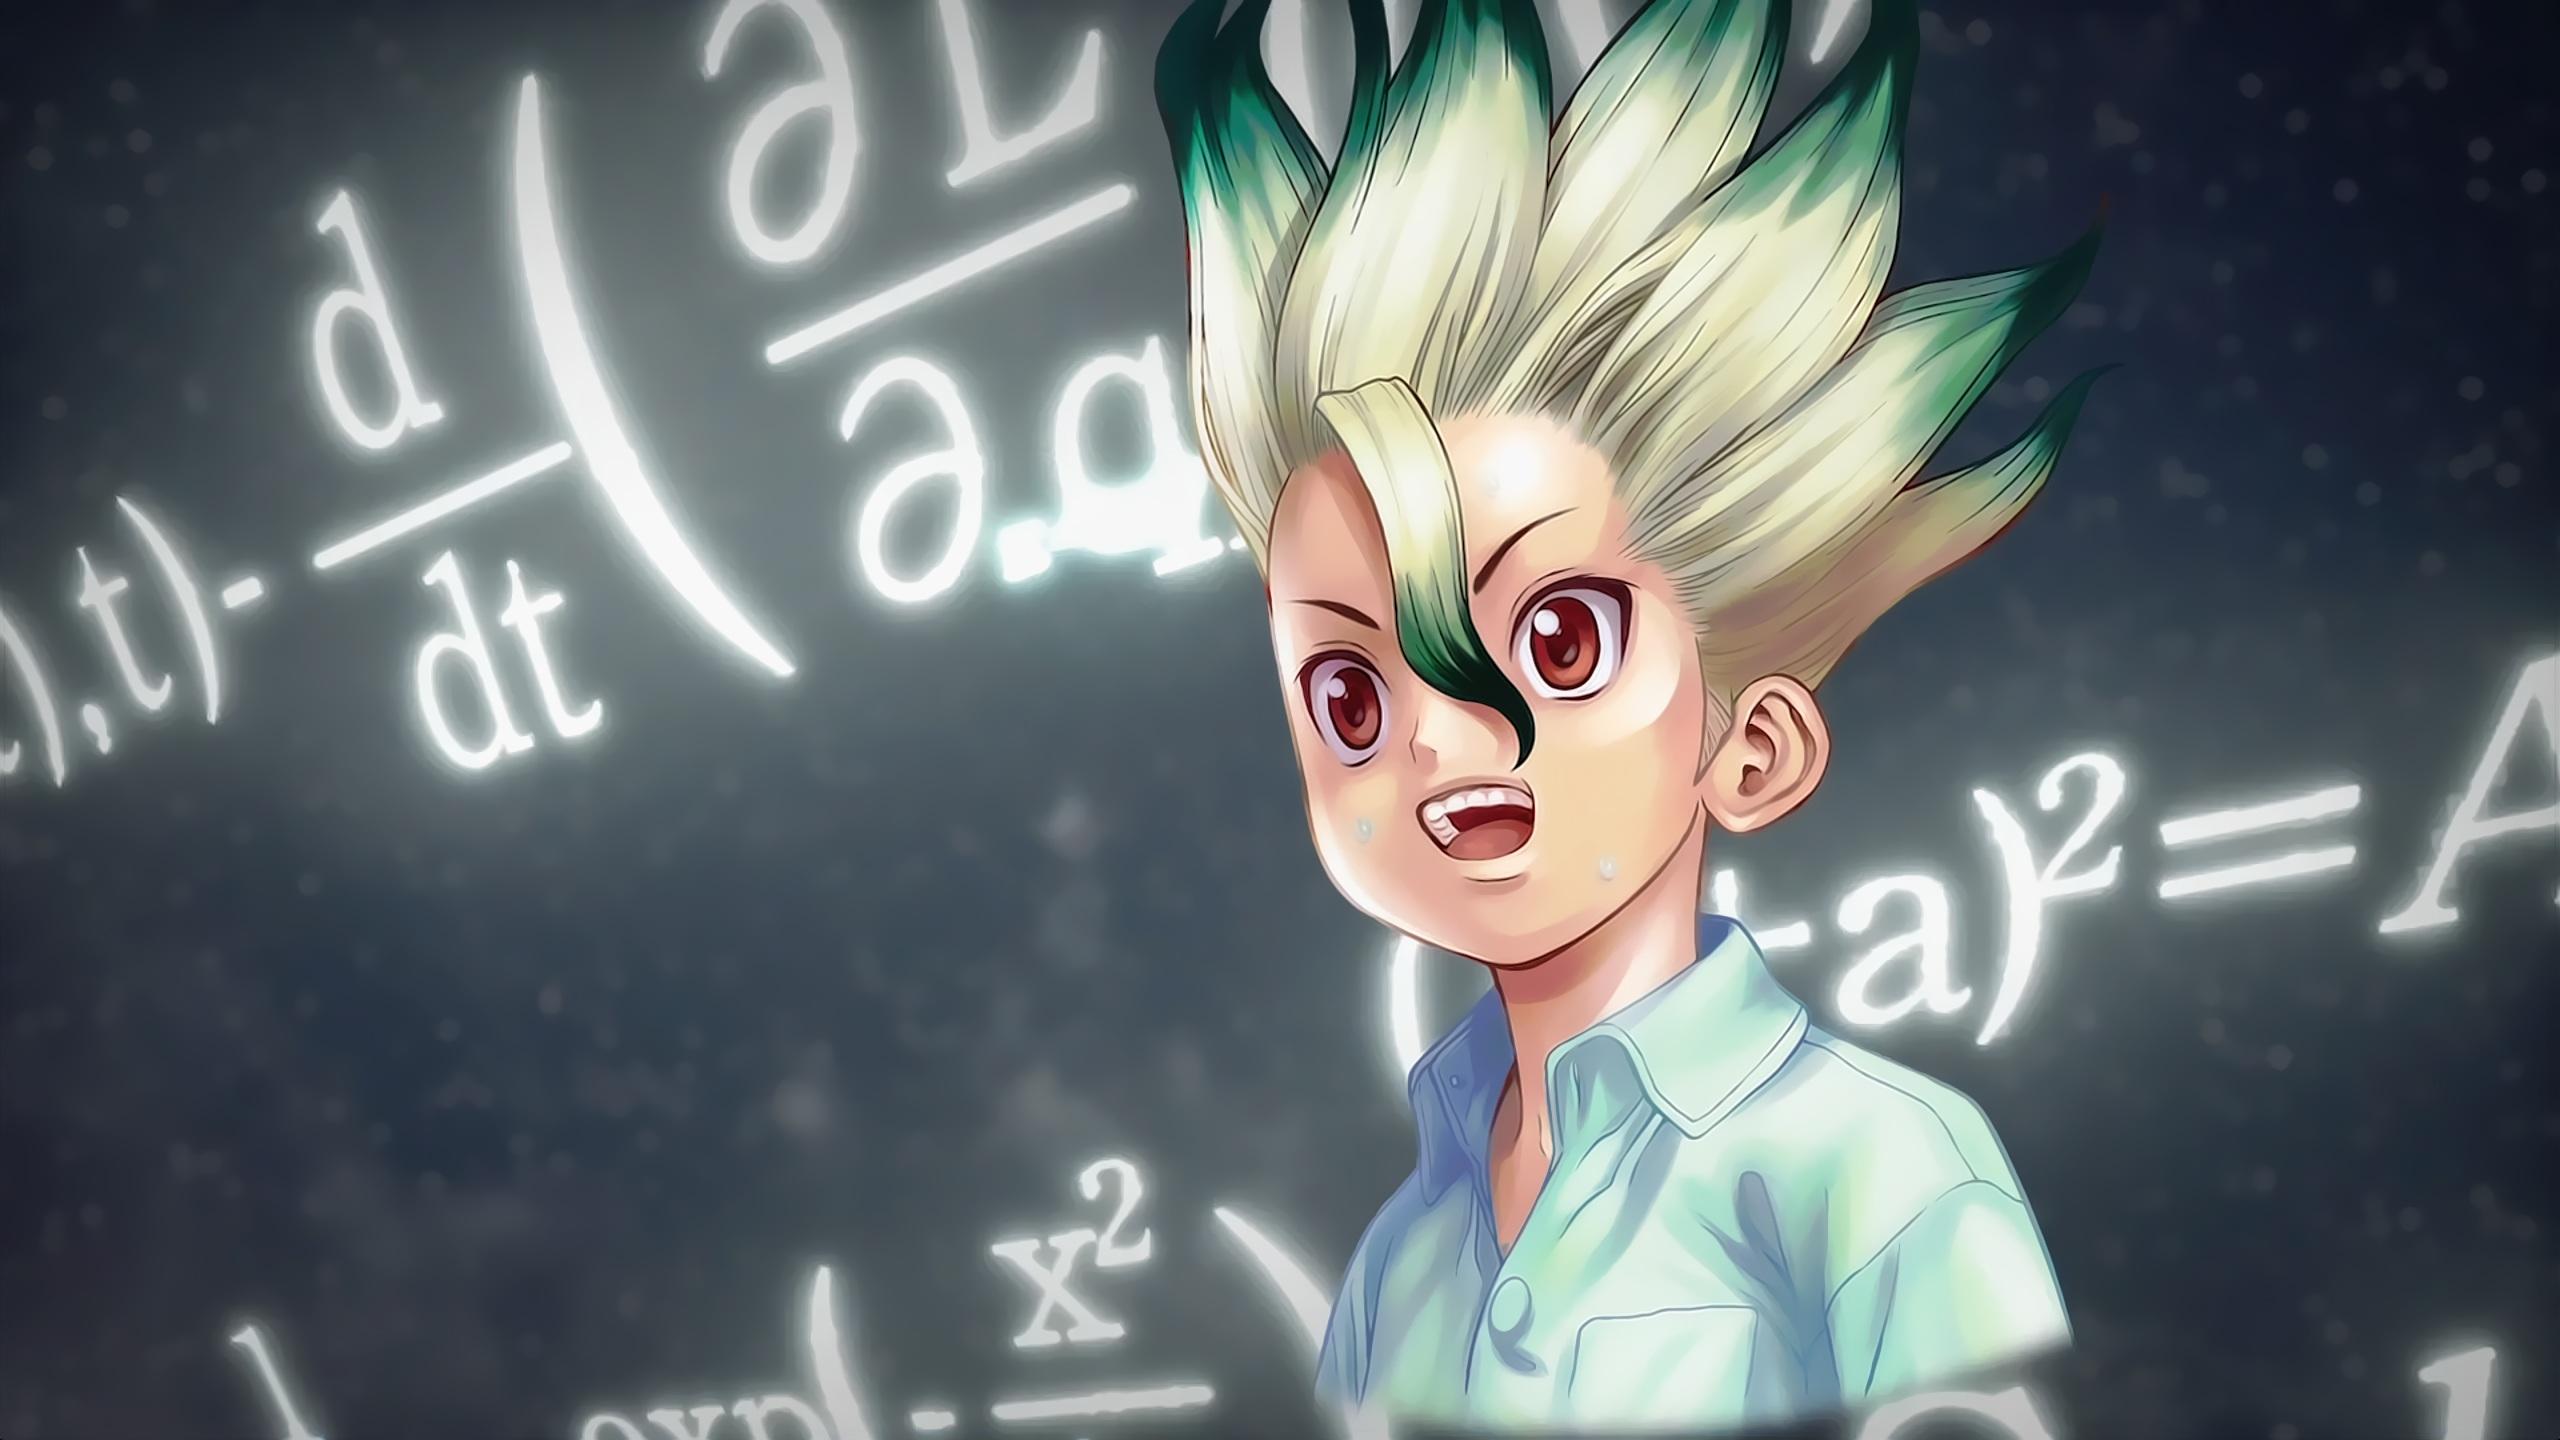 HD Anime Dr Stone Wallpapers - Wallpaper Cave